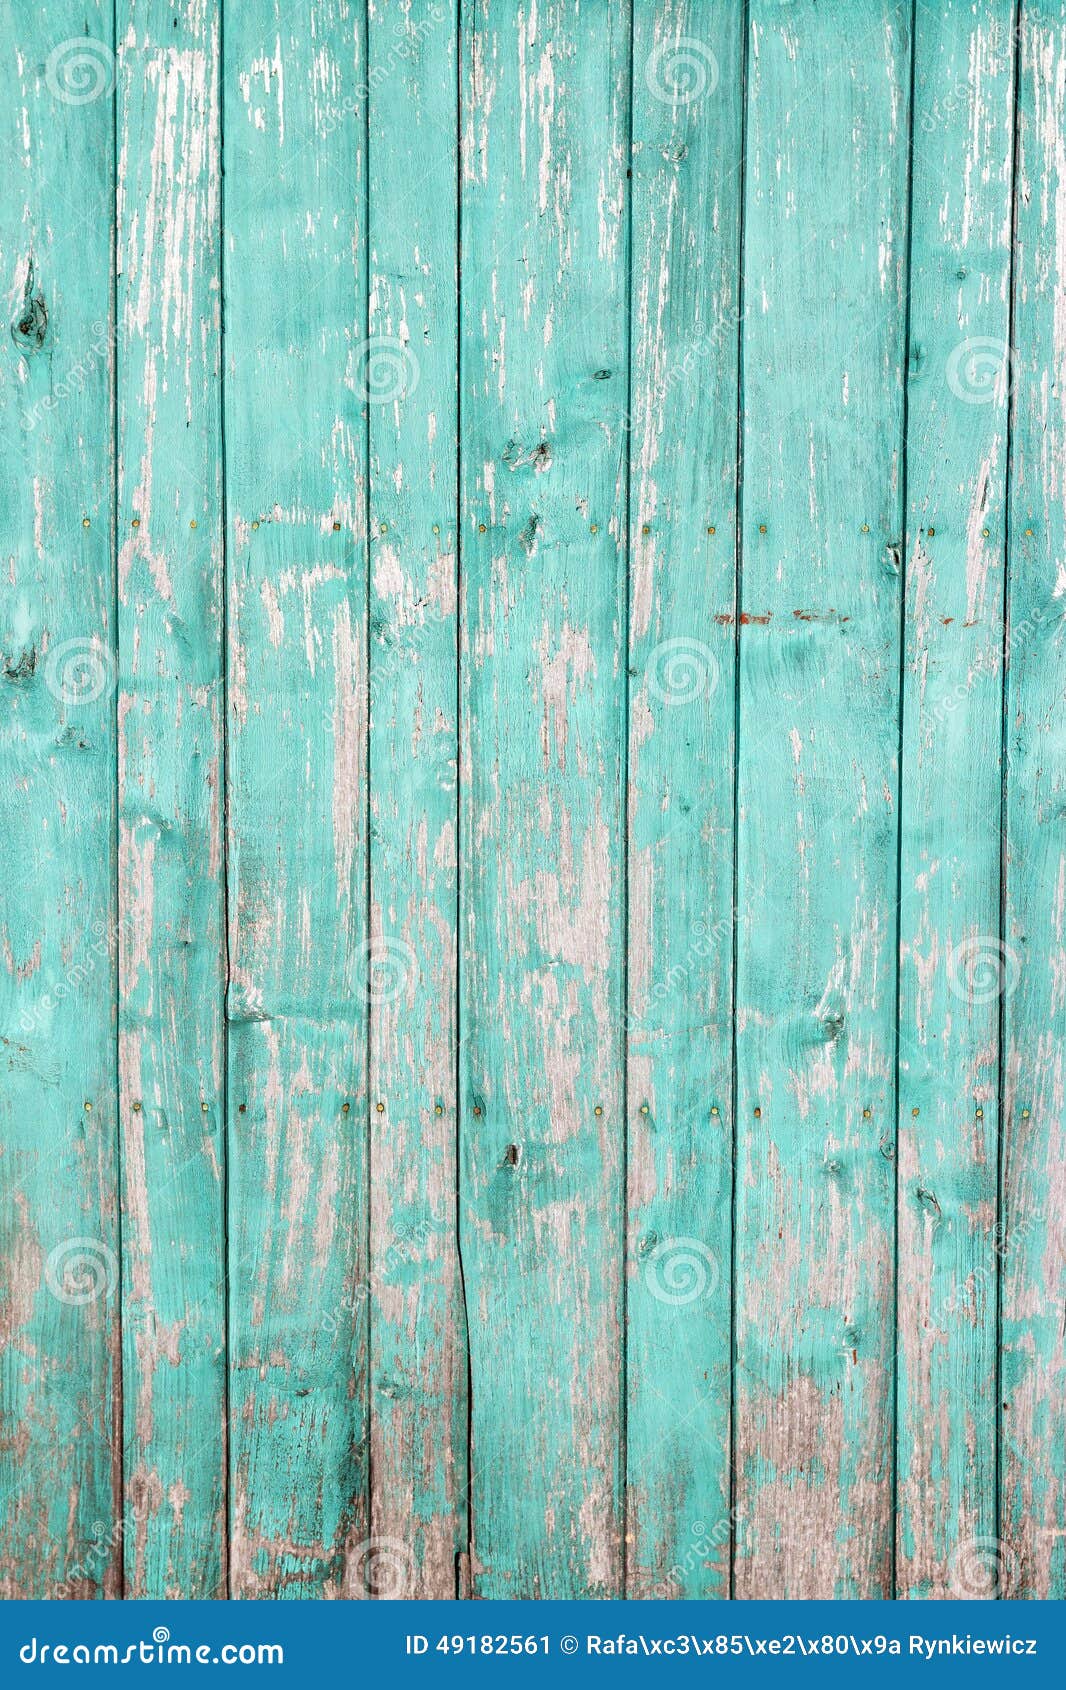 Old Painted Wood Wall - Texture Or Background Stock Photo 